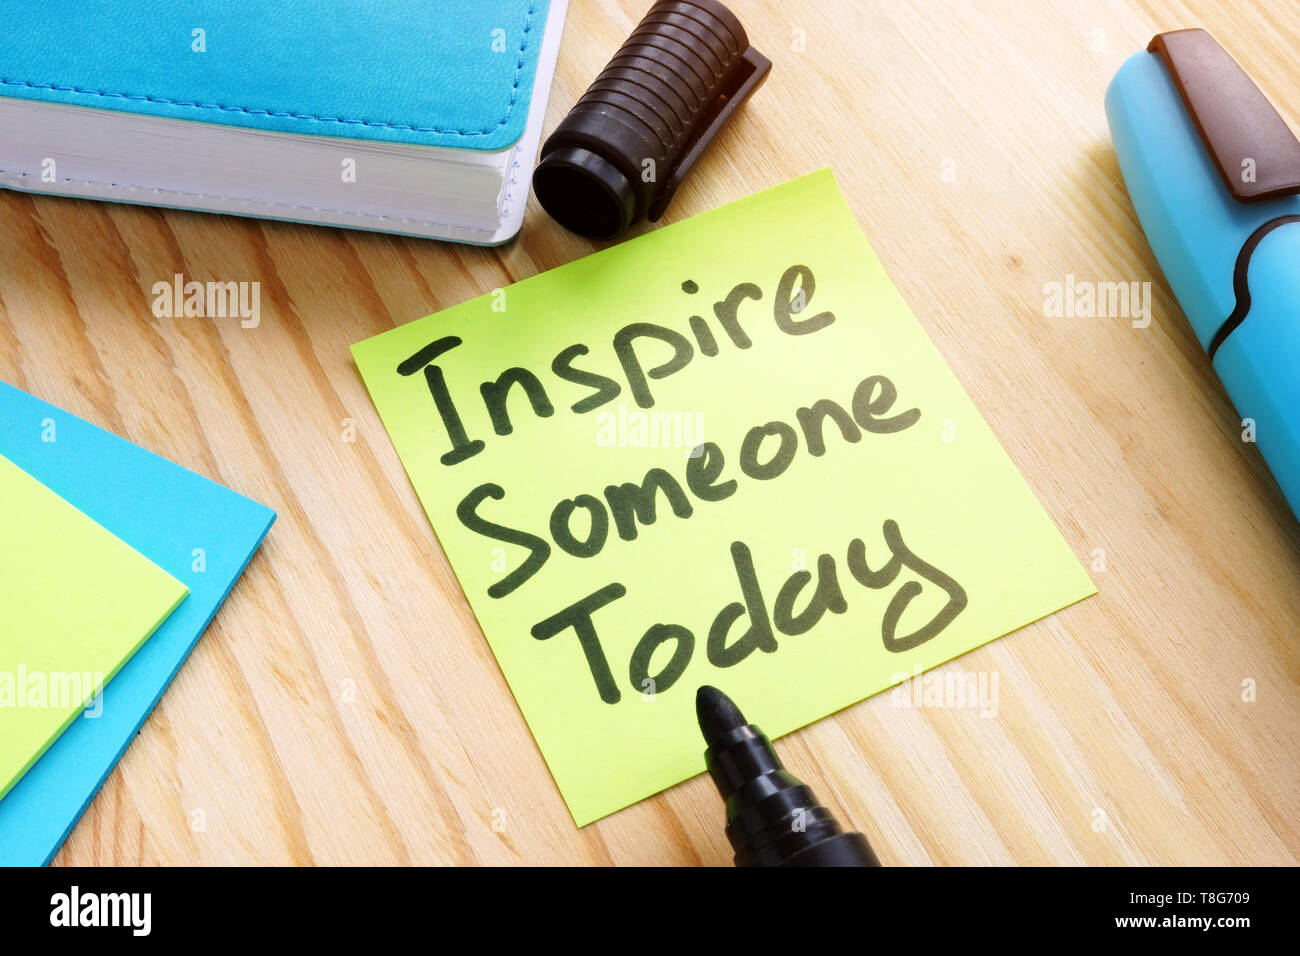 Quote Inspire someone today on desk. Inspiration concept. Stock Photo